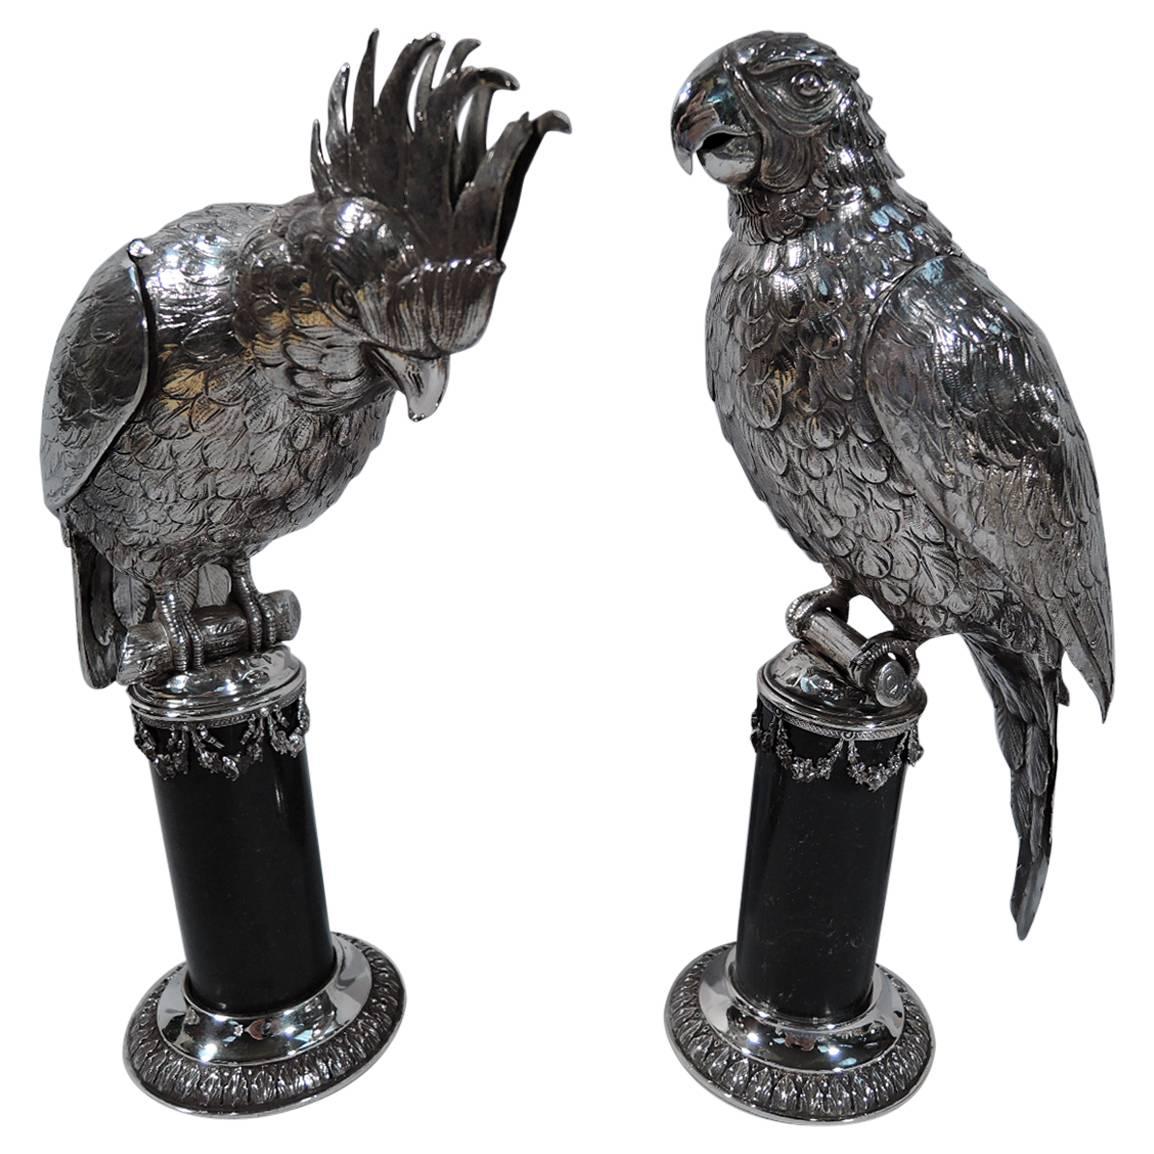 Antique German Silver Parrot Spice Boxes, a Pair of Pretty Pollies